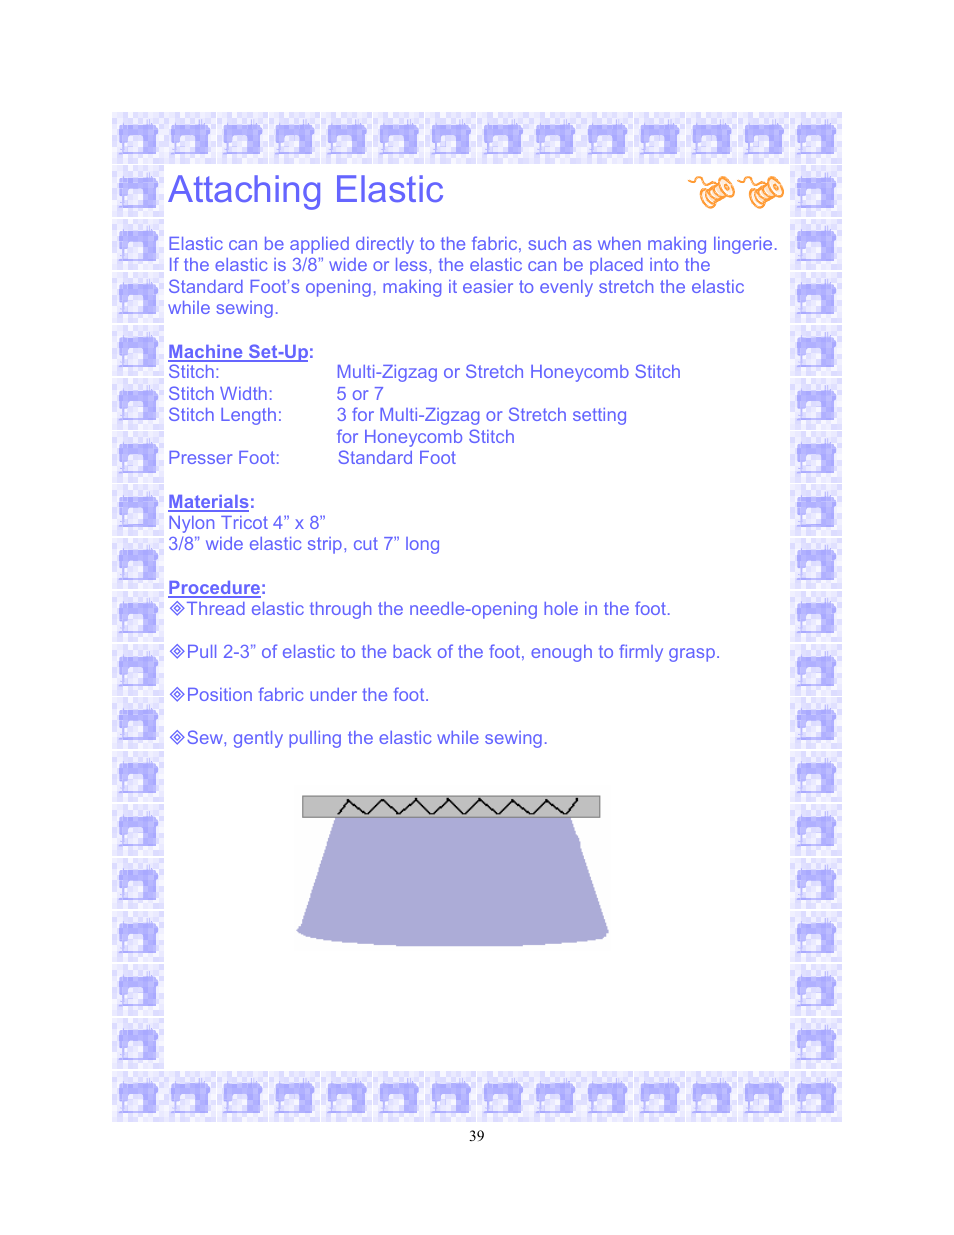 Attaching elastic | SINGER 6550-WORKBOOK Scholastic User Manual | Page 43 / 59